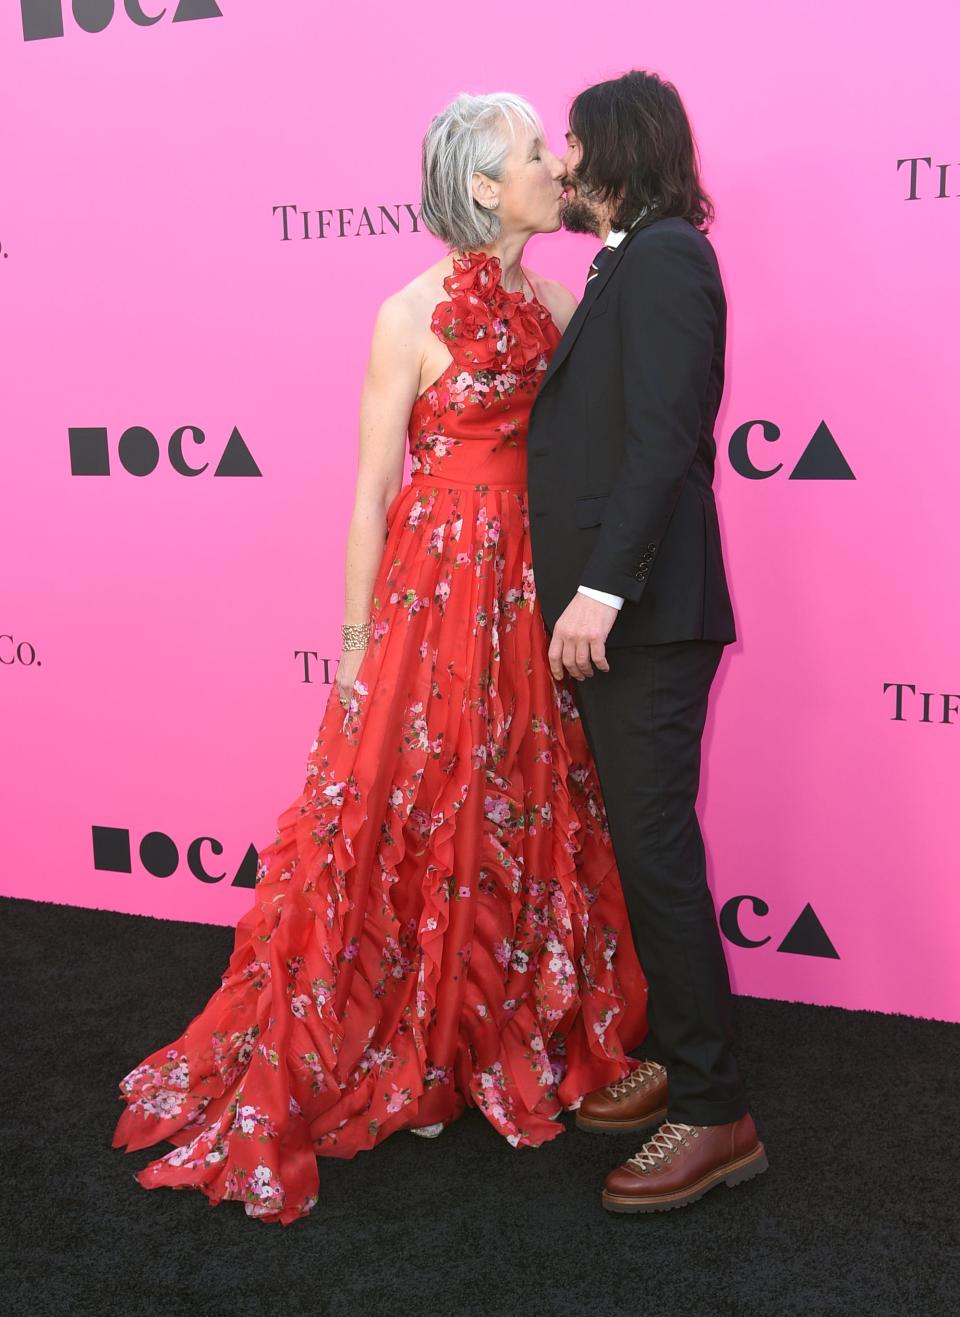 Between smiley photos on the red carpet, Reeves, right, and Grant took a moment for a quick smooch.